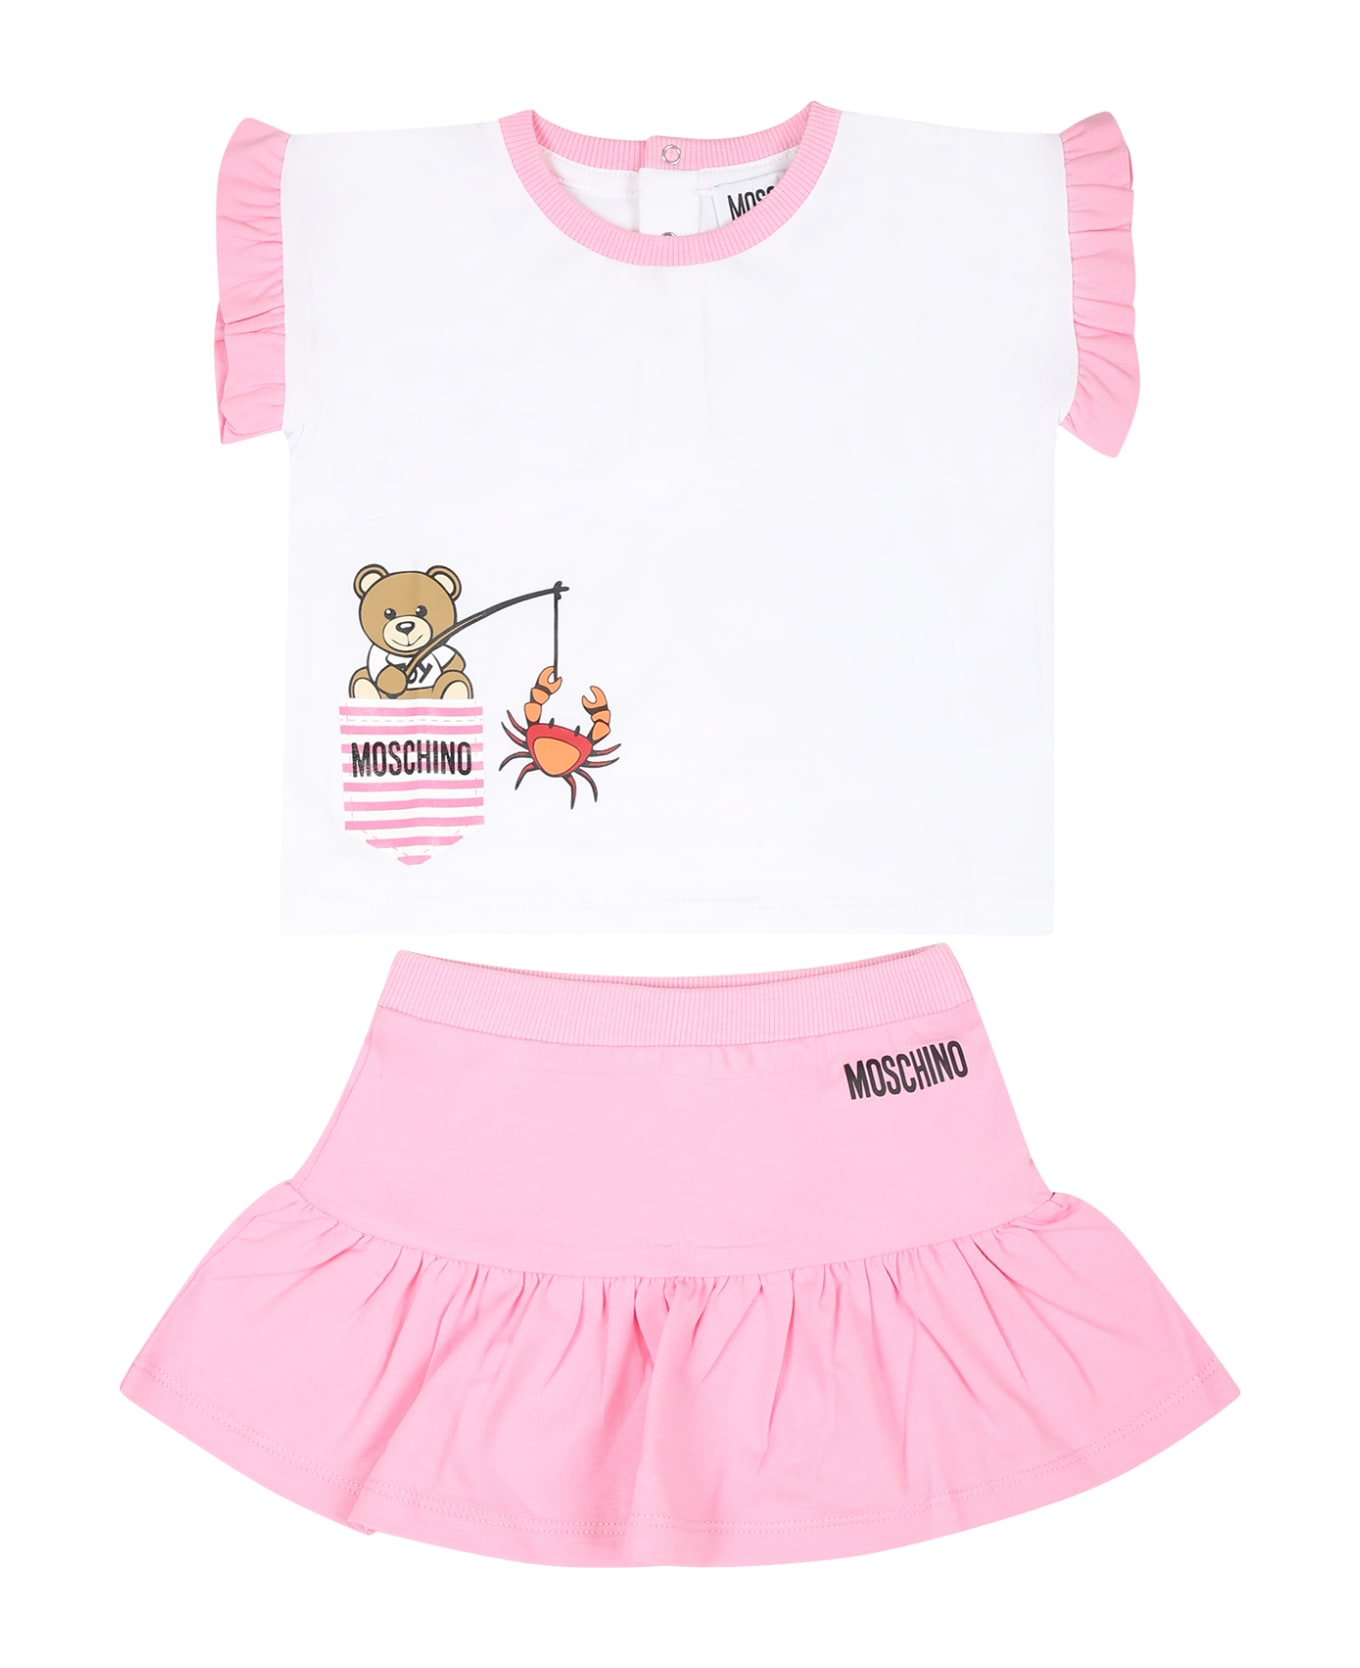 Moschino Pink Suit For Baby Girl With Teddy Bear - Pink